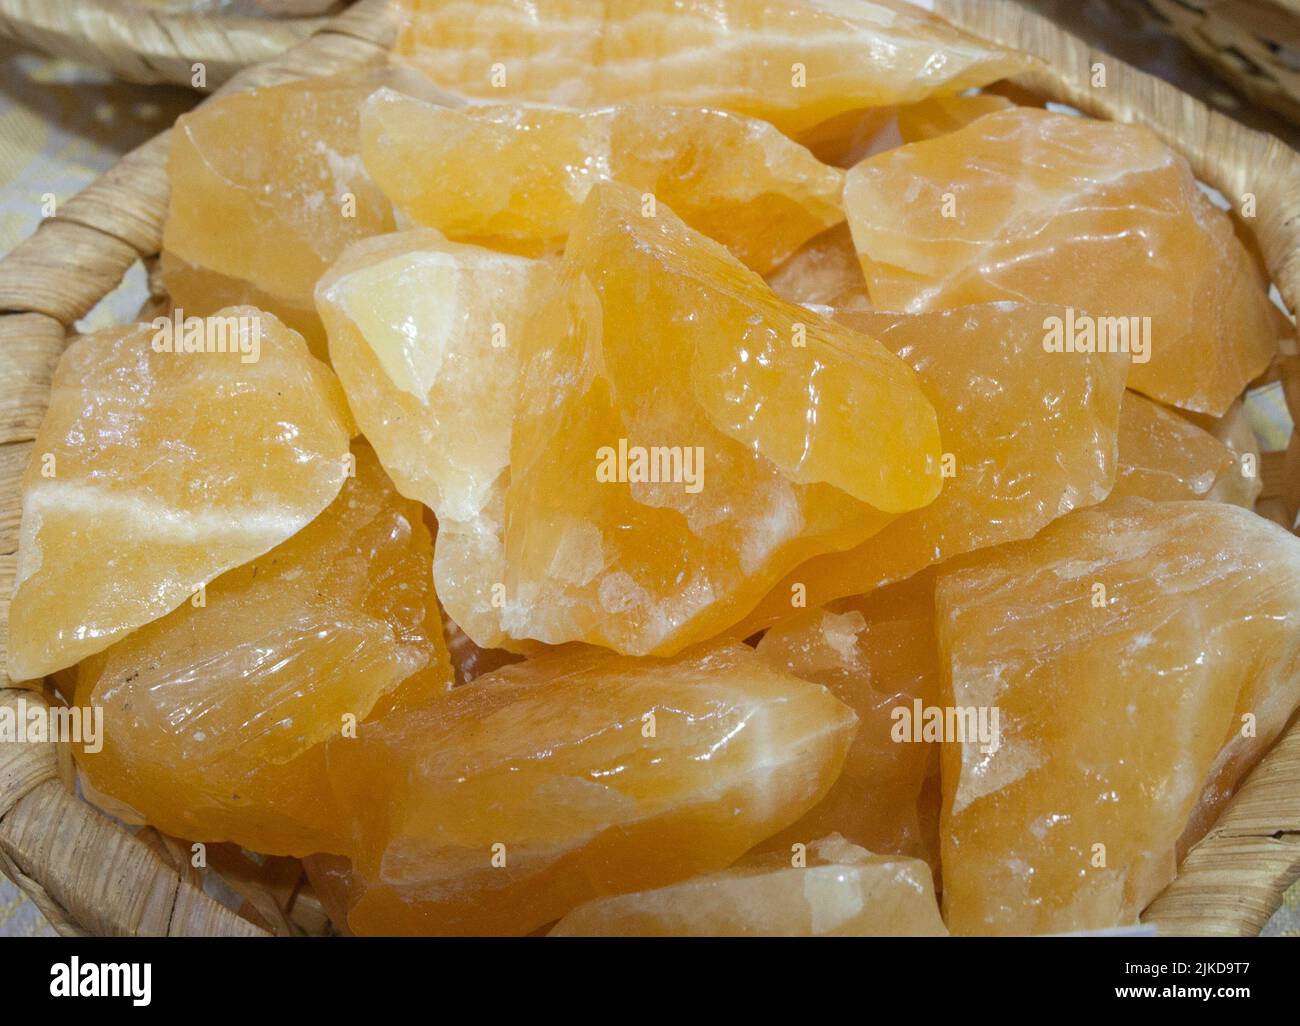 Yellow calcite fragments, believed to have beneficial health properties. Displayed on basket at street market stall. Stock Photo